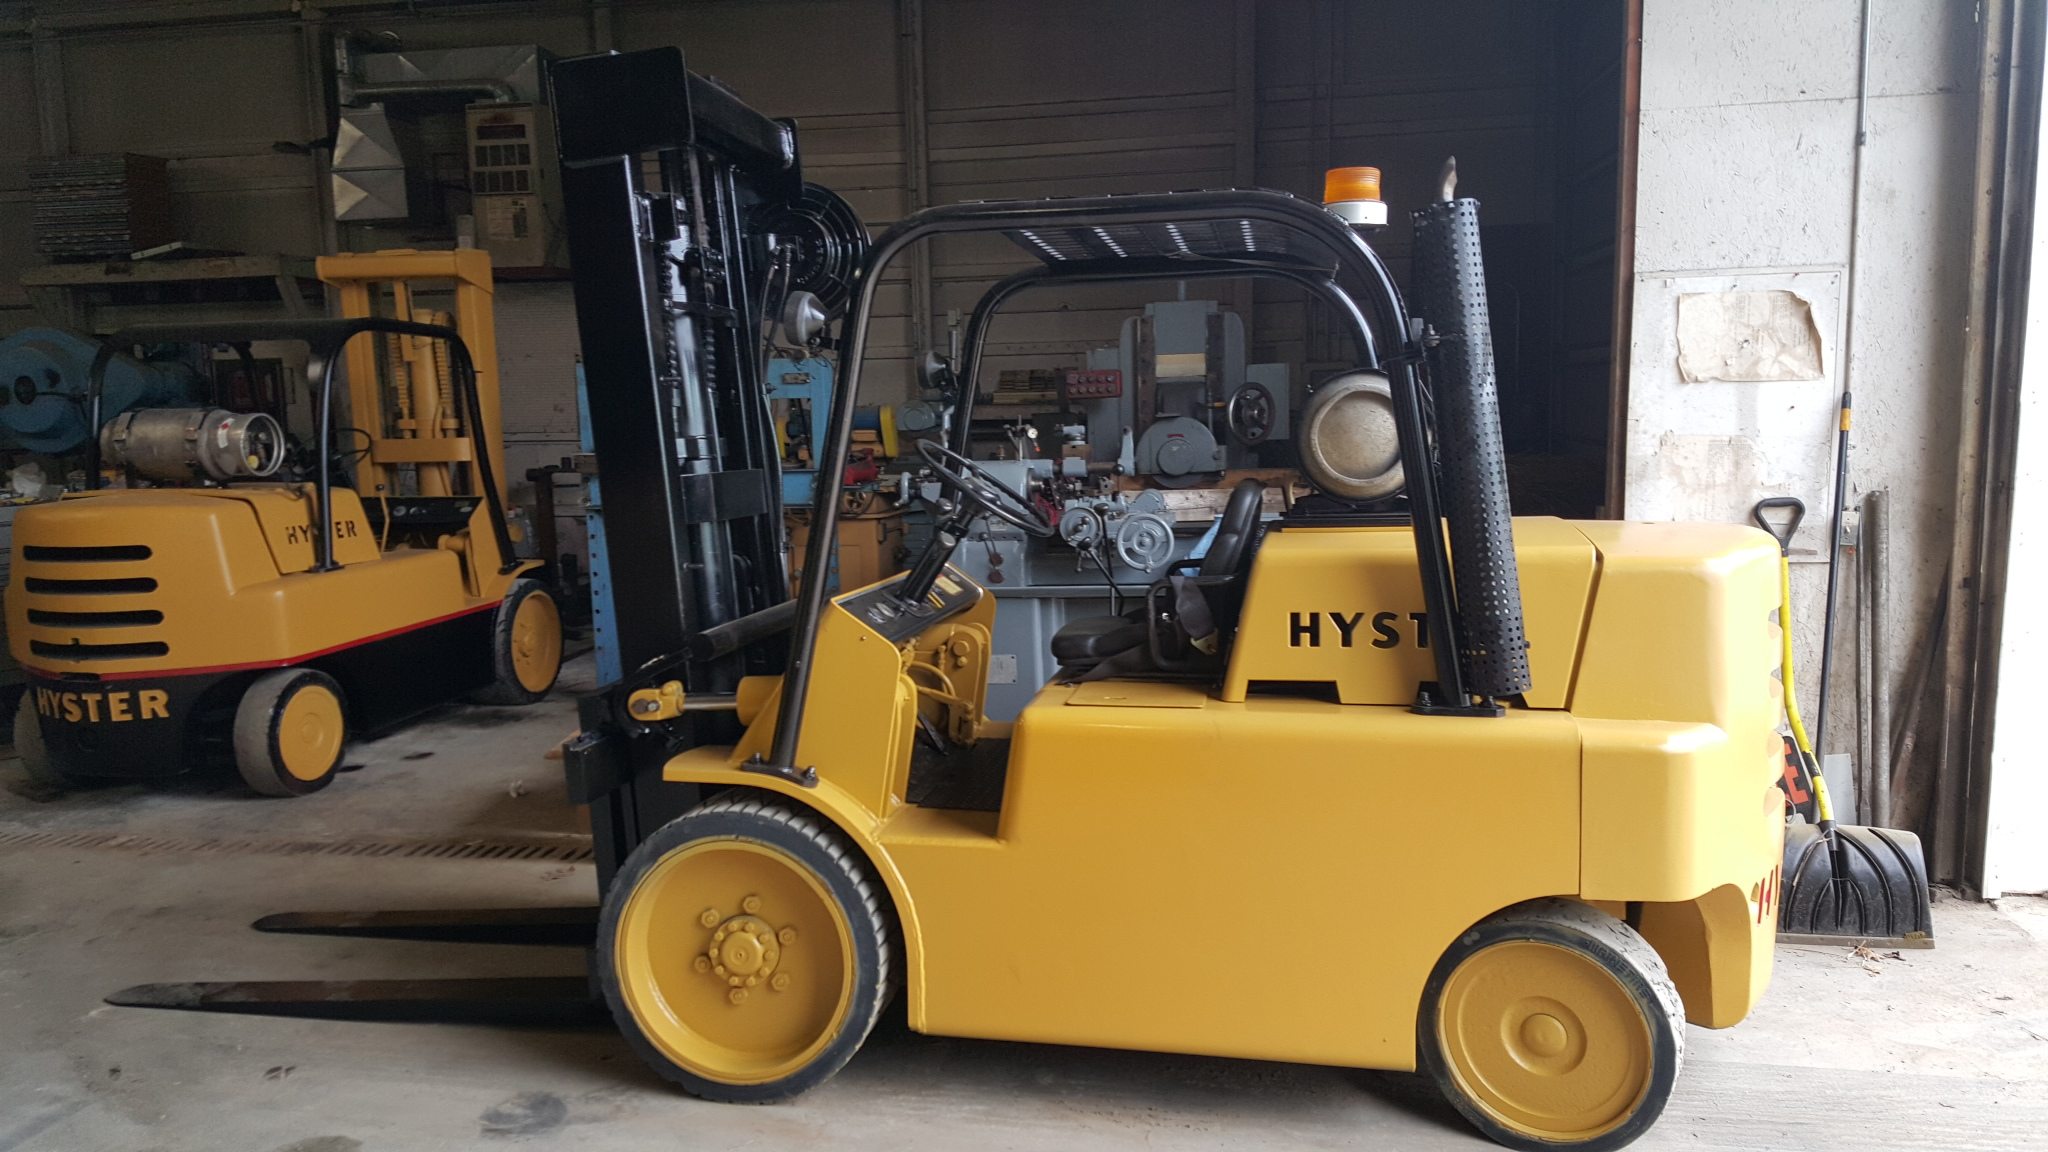 15 000lbs Hyster S150a Forklift For Sale Call 616 200 4308affordable Machinery